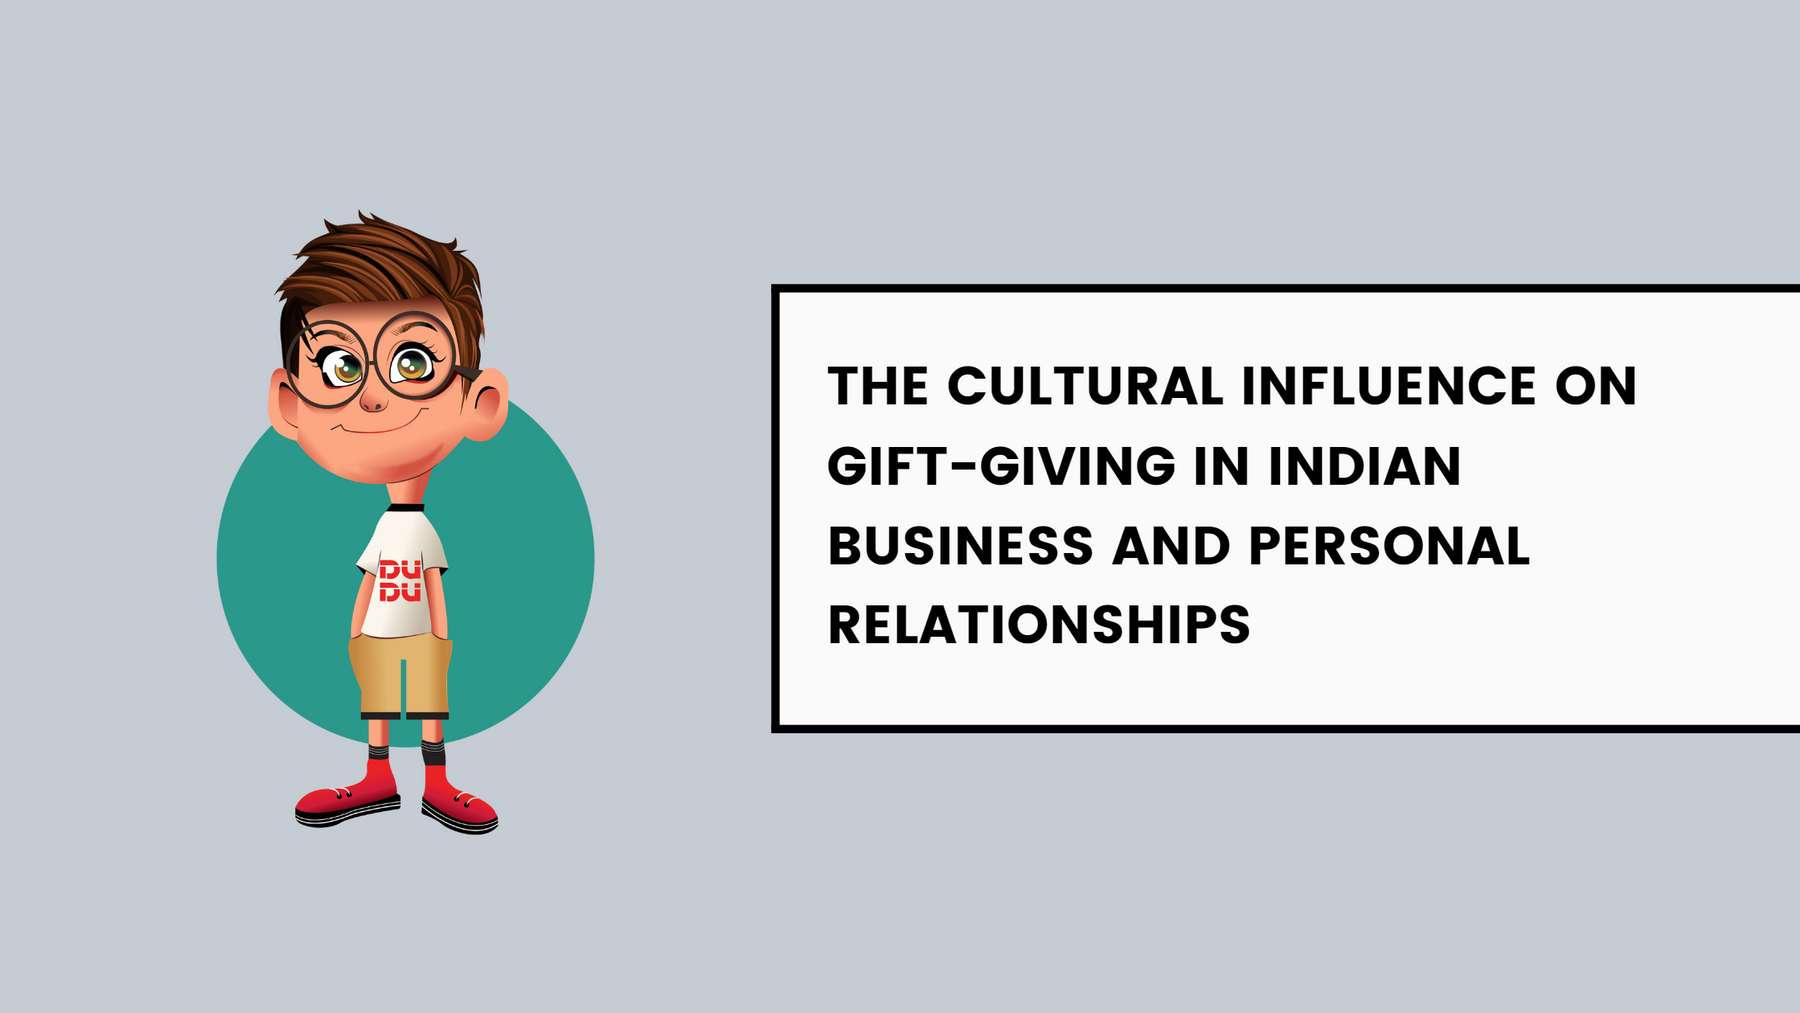 The Cultural Influence On Gift-Giving In Indian Business And Personal Relationships